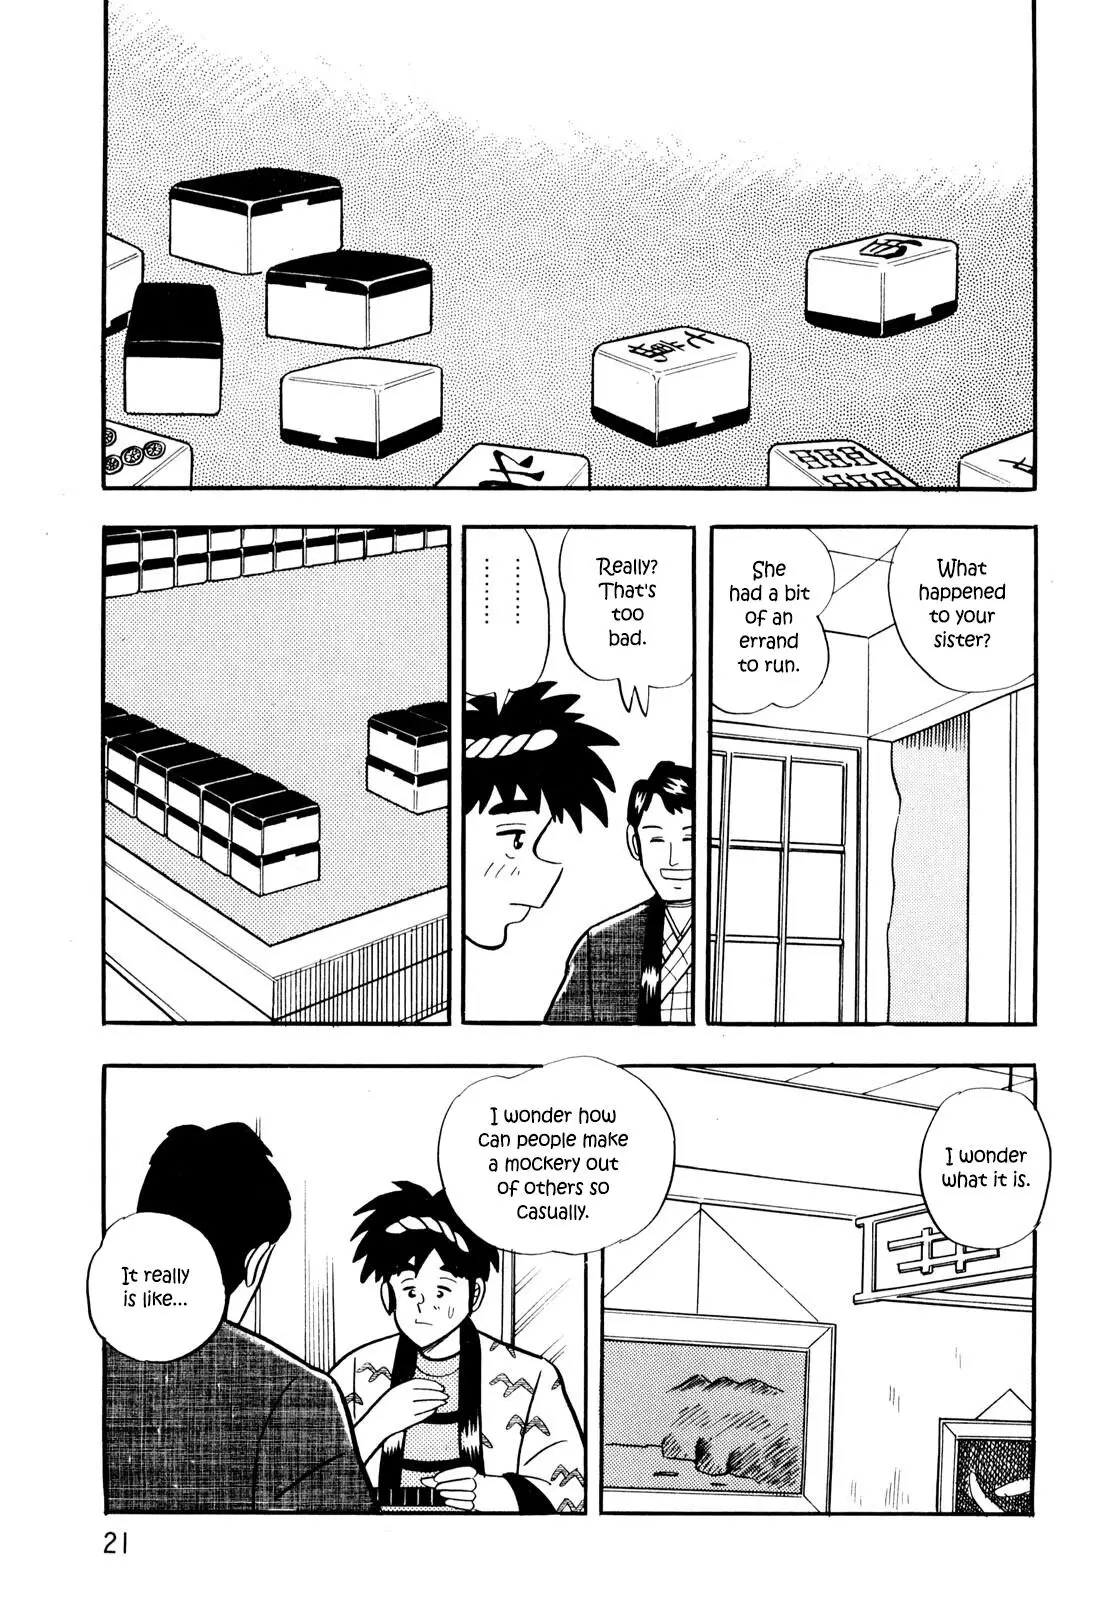 Welcome To Harukaze - A Mahjong Guesthouse Story - 1 page 19-842e8ef8